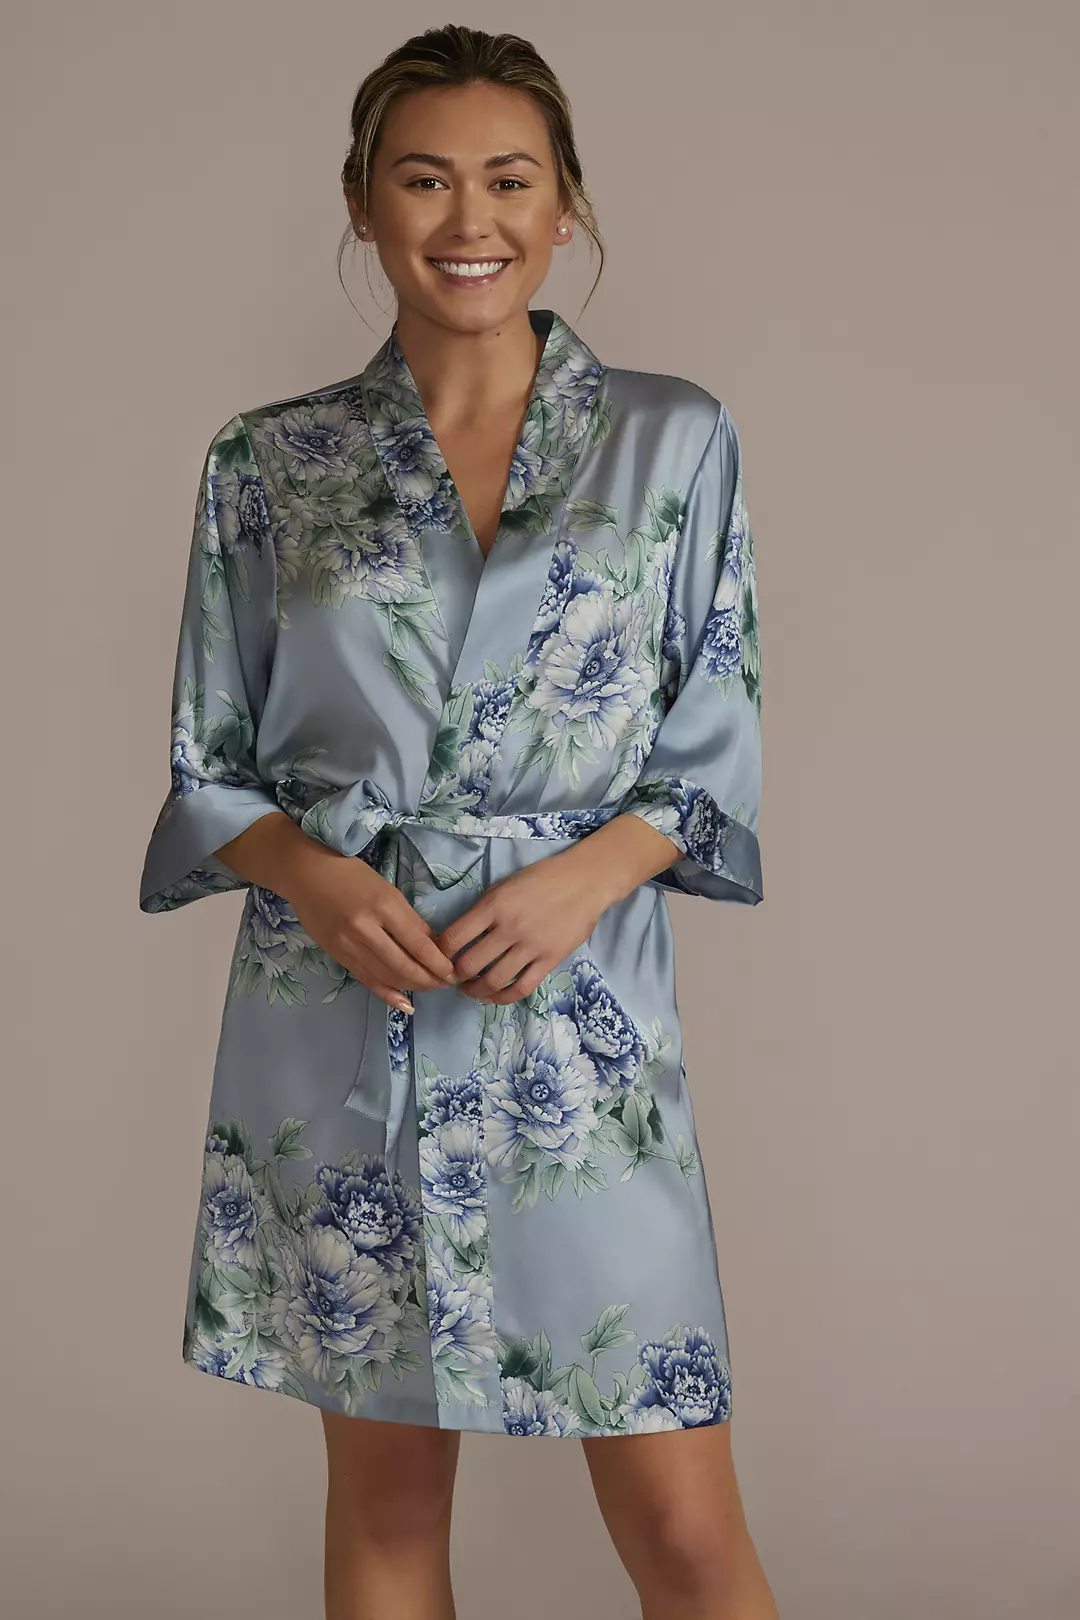 Dusty Blue and Green Floral Satin Robe Image